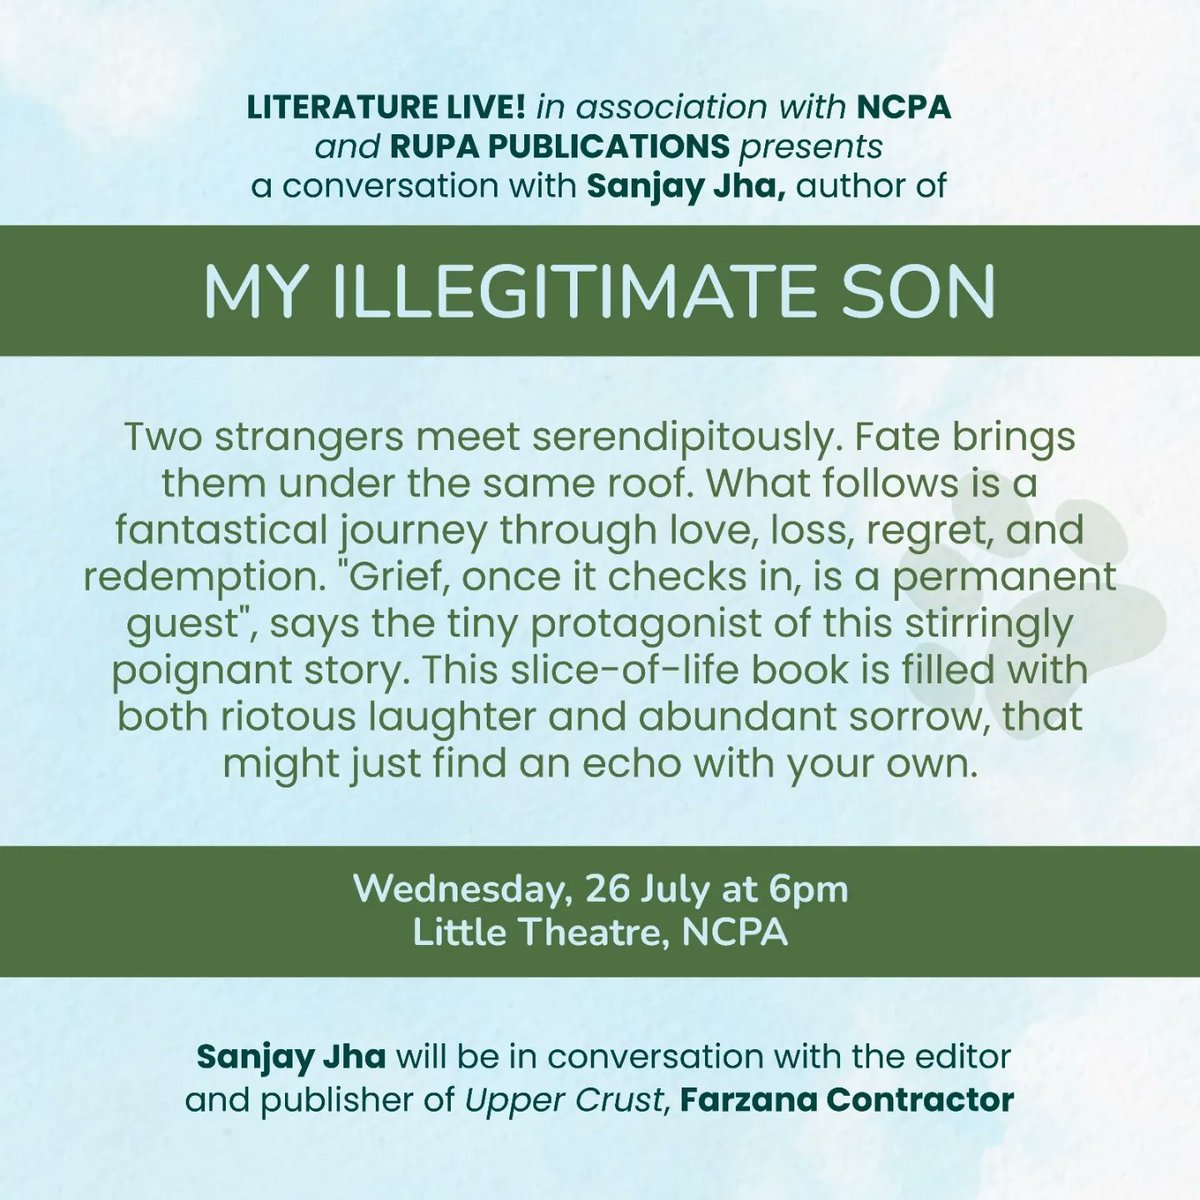 Join us for a conversation between the author Sanjay Jha and the editor and publisher of 'Upper Crust' Farzana Contractor on 26th July at 6pm @ Little Theatre, NCPA.

RSVP link in bio.

#LiteratureLiveEvenings #MyIllegitimateSon #PetParents #DogLovers #LiteratureLovers